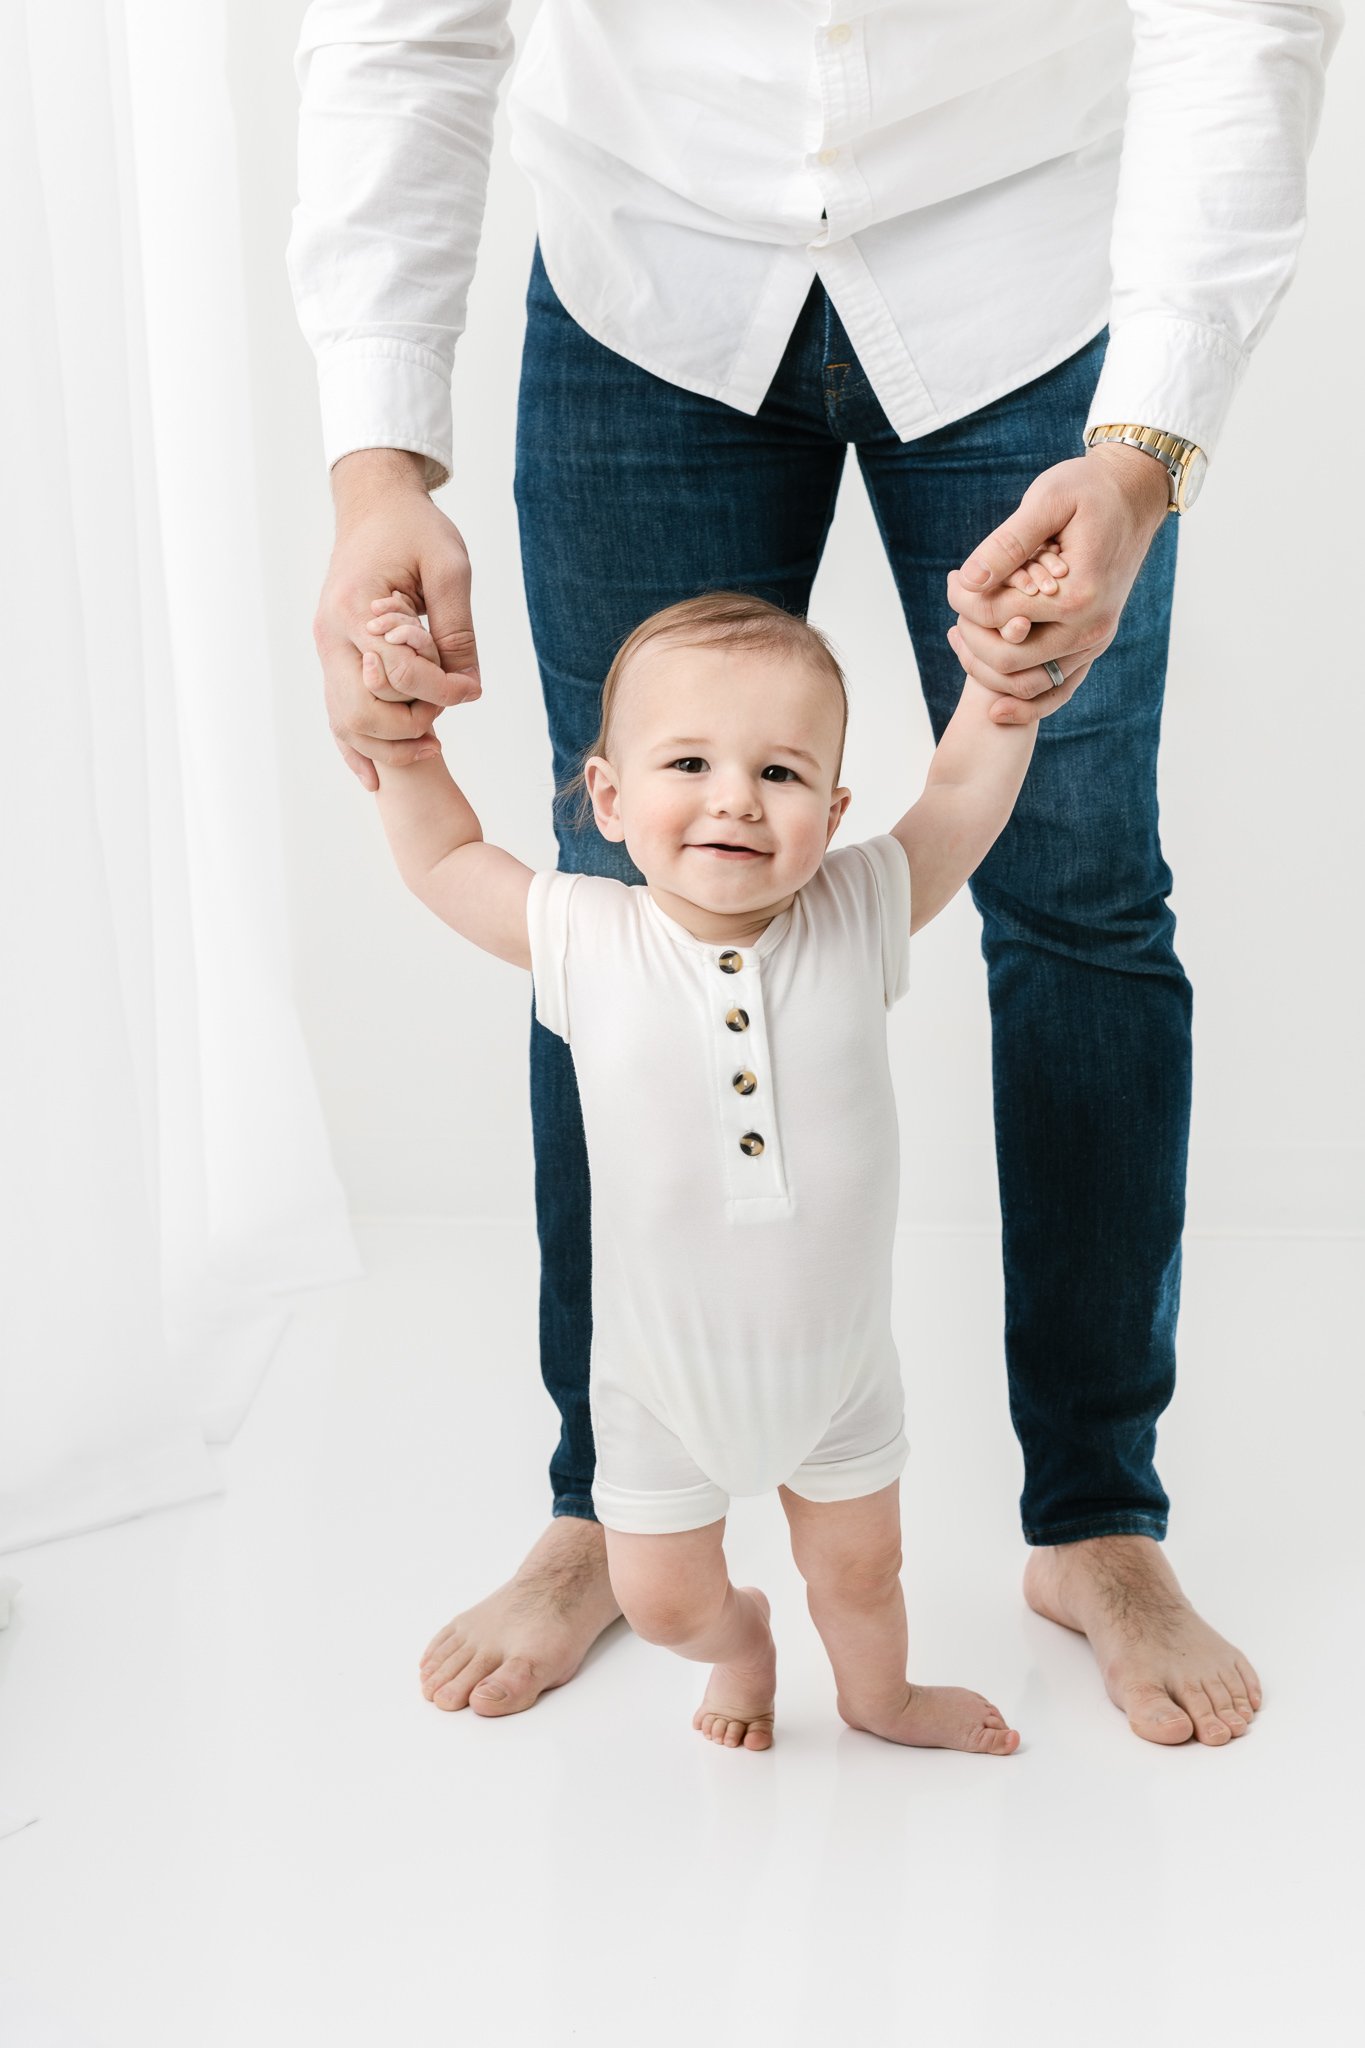  Studio baby portraits for a little boy smiling as he walks around with his father by Nicole Hawkins Photography. baby boy walking white romper baby boy studio outfits baby #NicoleHawkinsPhotography #NicoleHawkinsBabies #FirstBirthdayPhotography #Stu